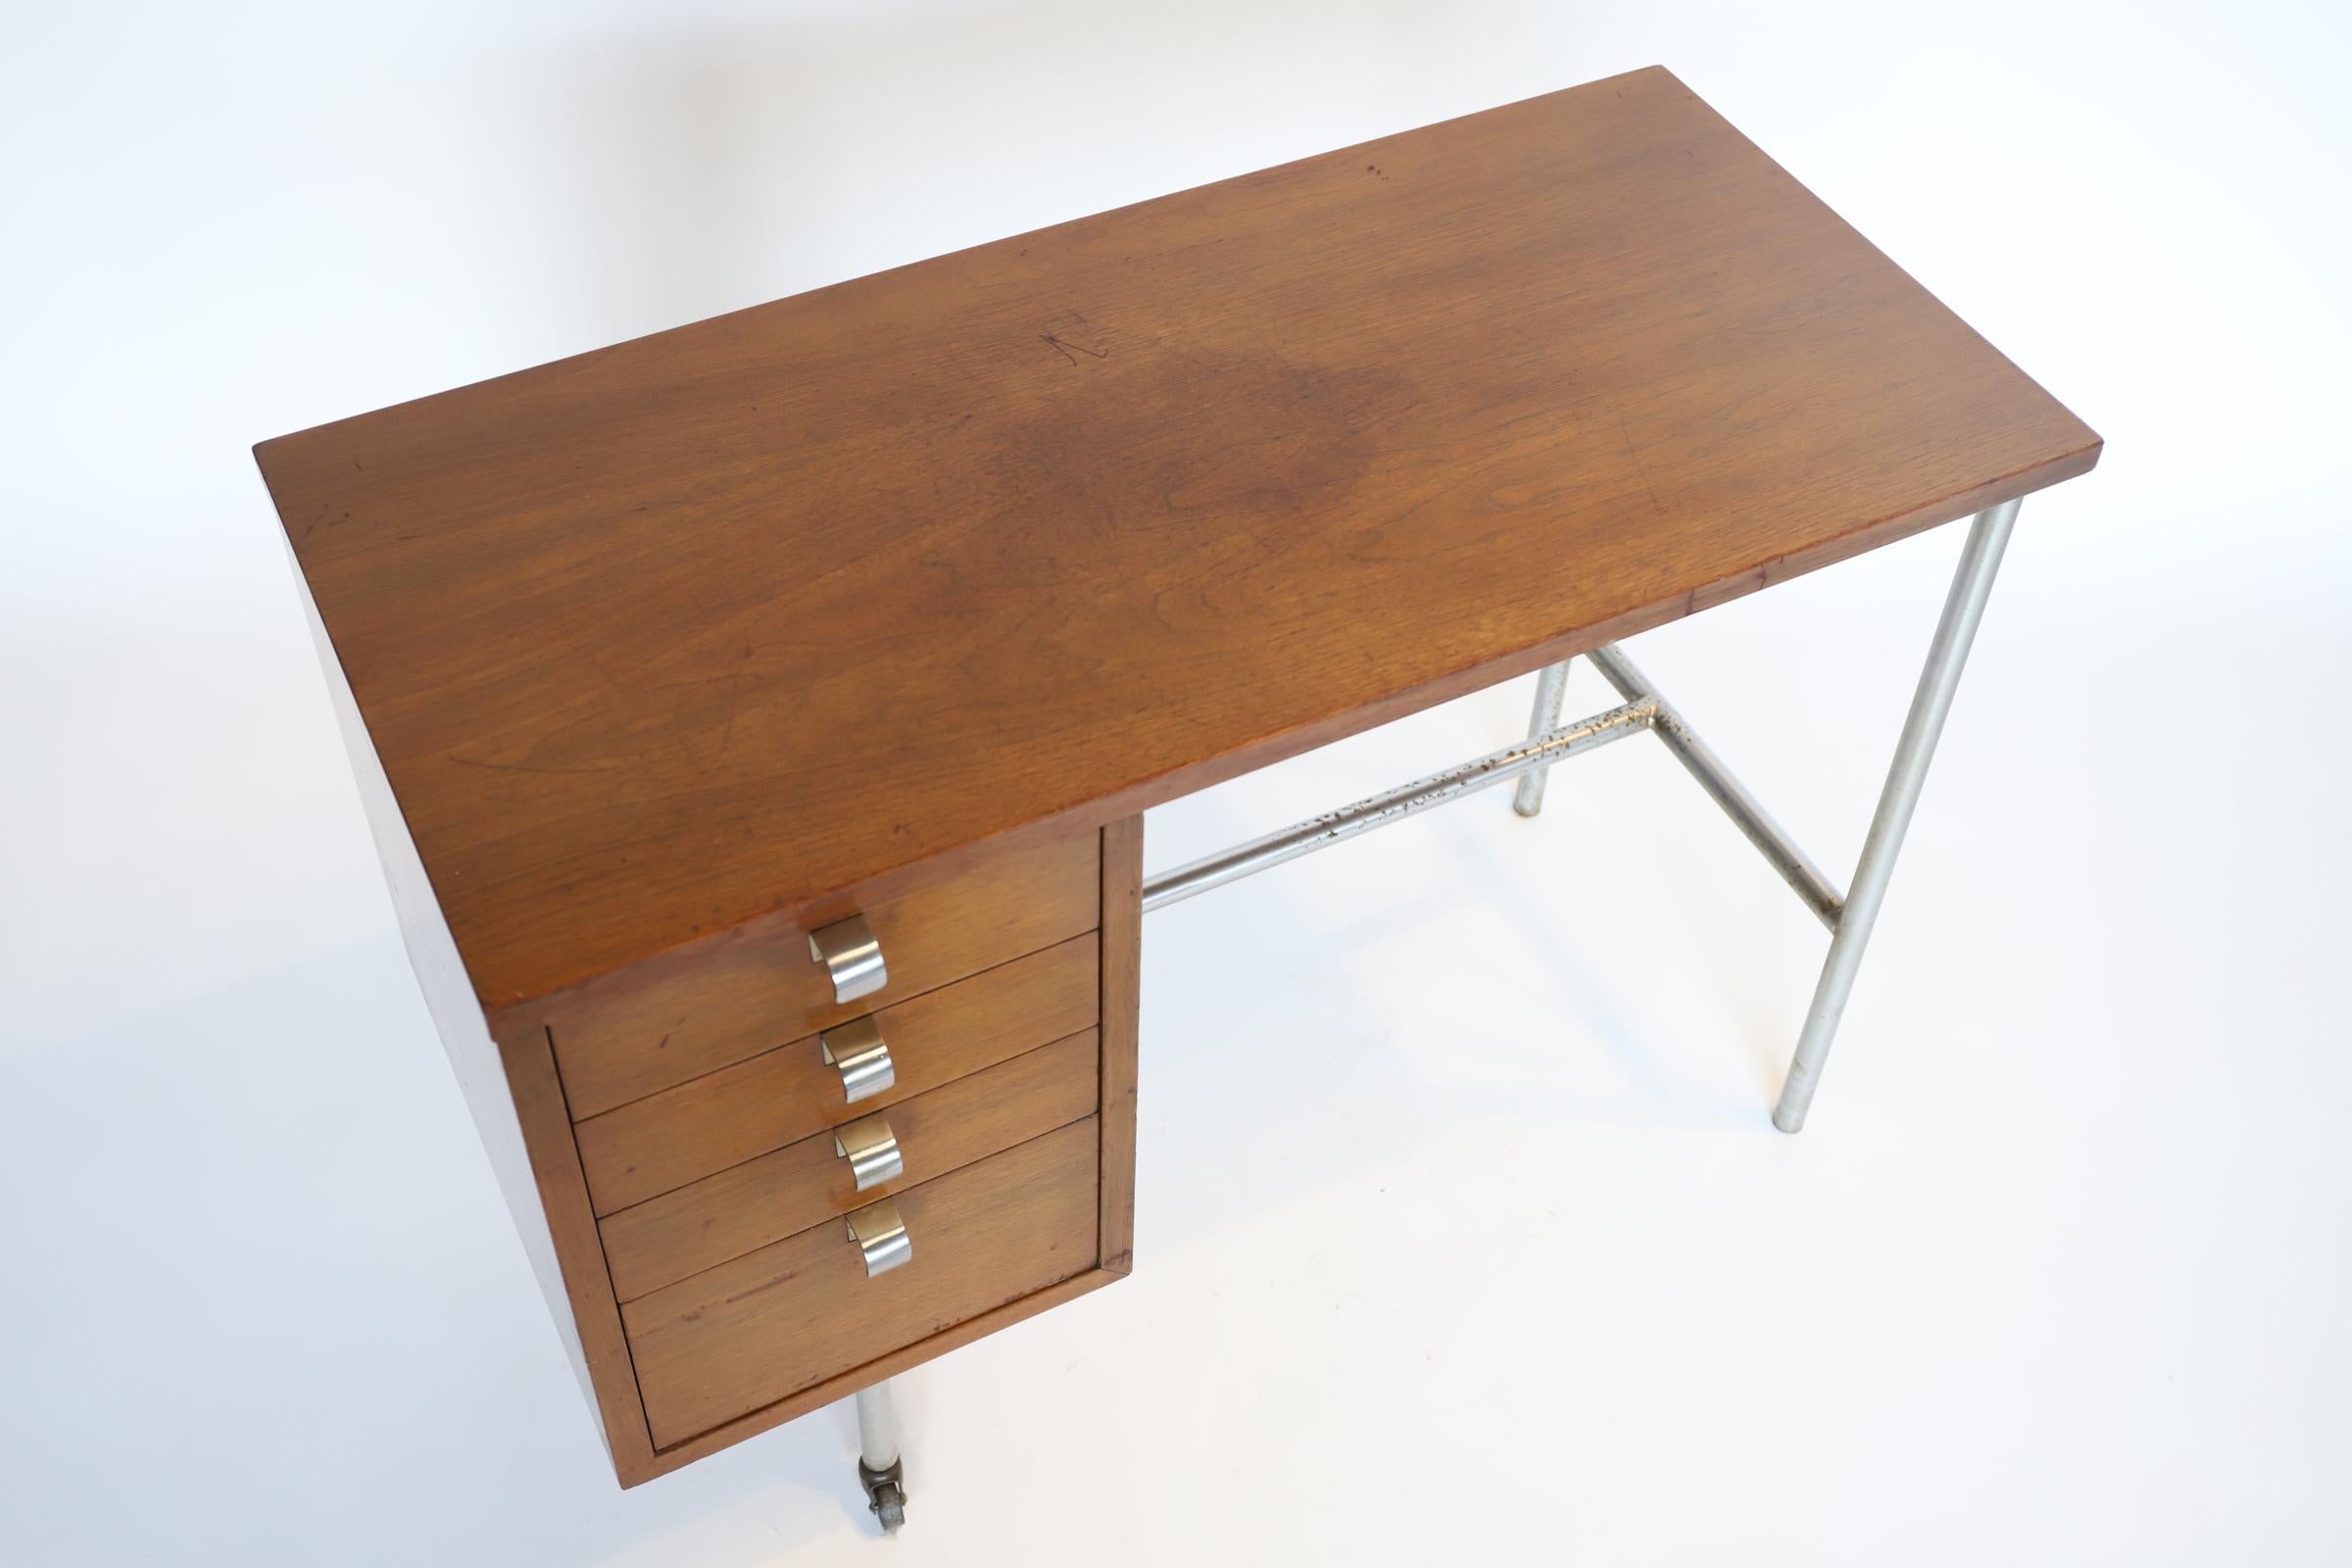 Introducing the iconic Herman Miller typewriter desk return, a testament to the visionary design of George Nelson. This exceptional piece seamlessly combines functionality with mid-century modern aesthetics, making it a sought-after addition to any